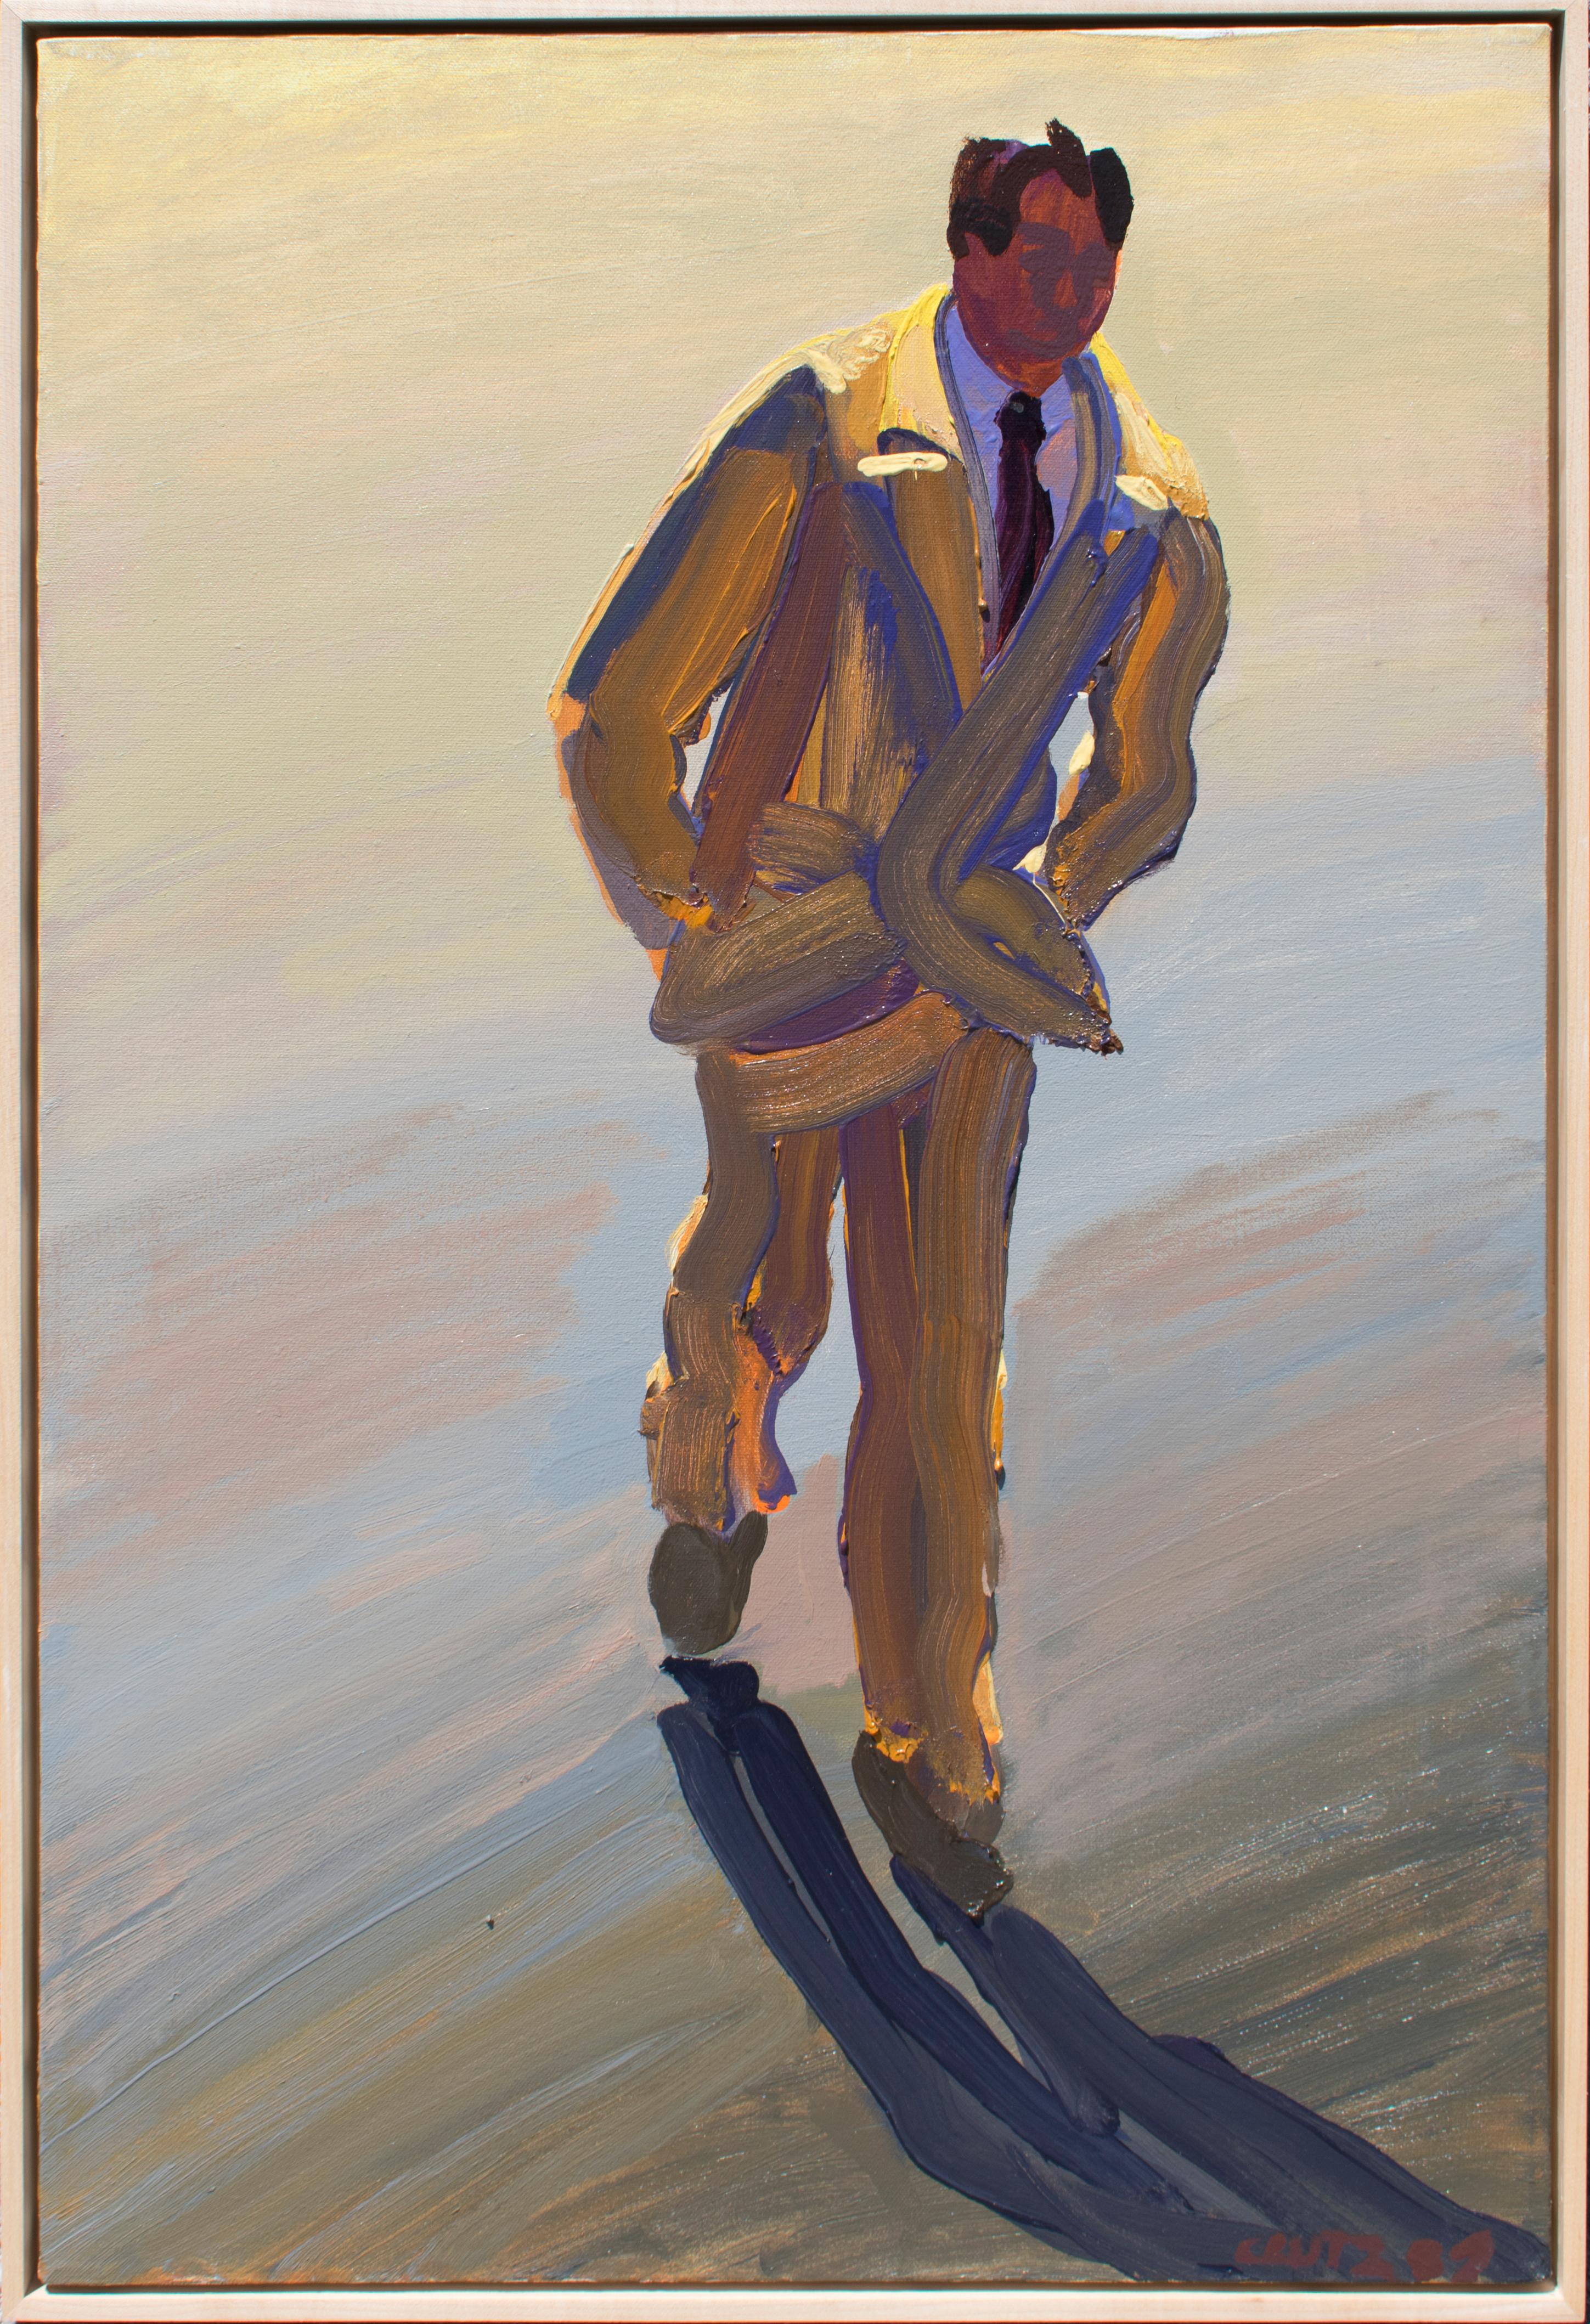 Tan Suit IV: Abstract Figurative Painting of Man in Beige Suit by William Clutz